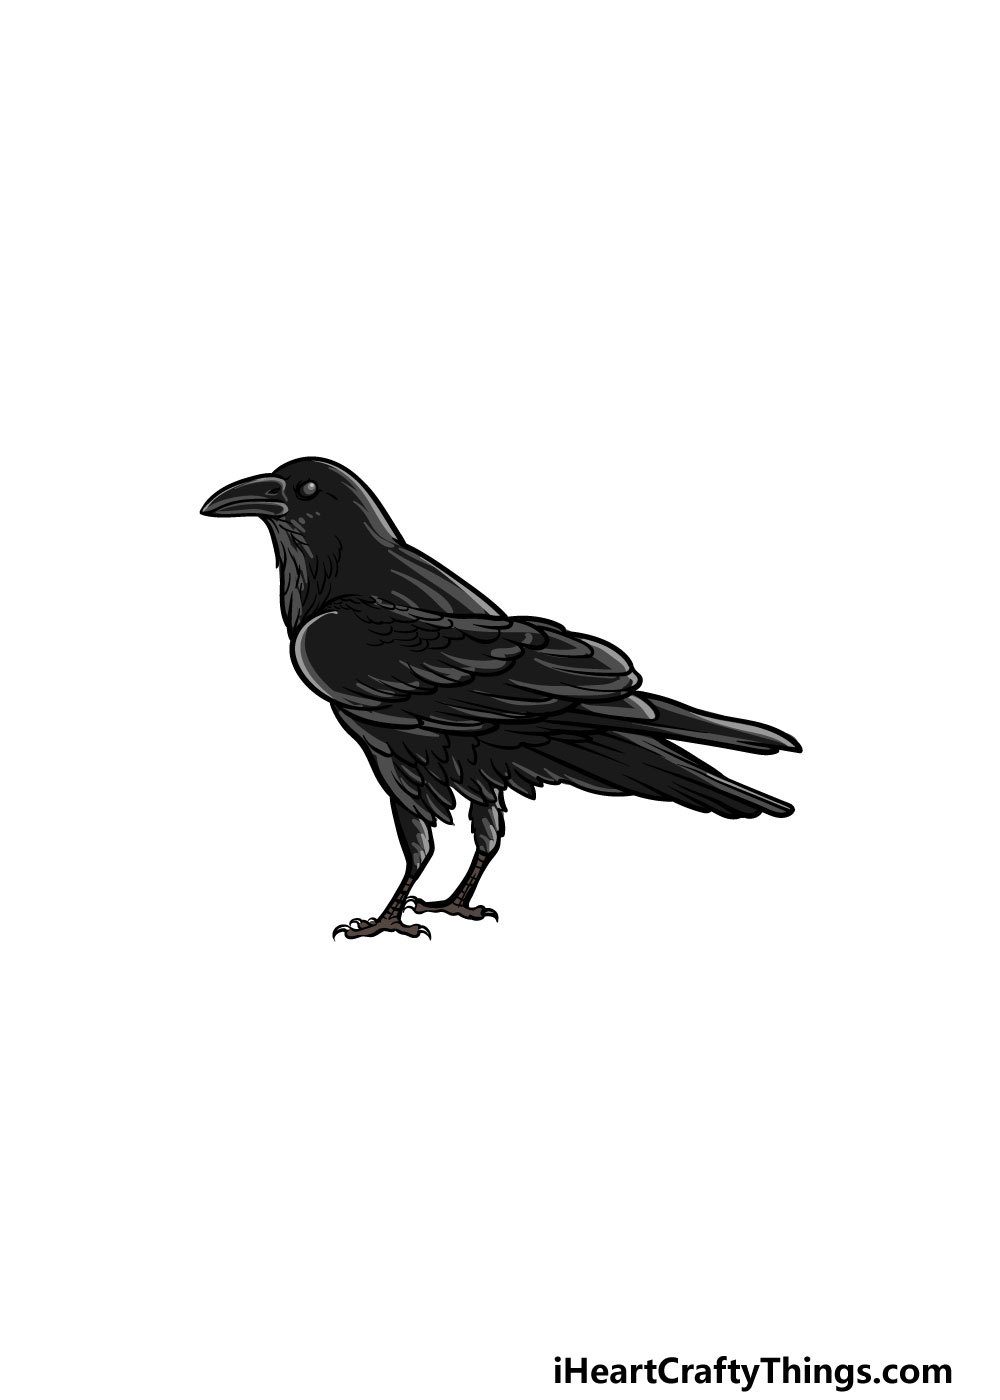 Crow Drawing - How To Draw A Crow Step By Step